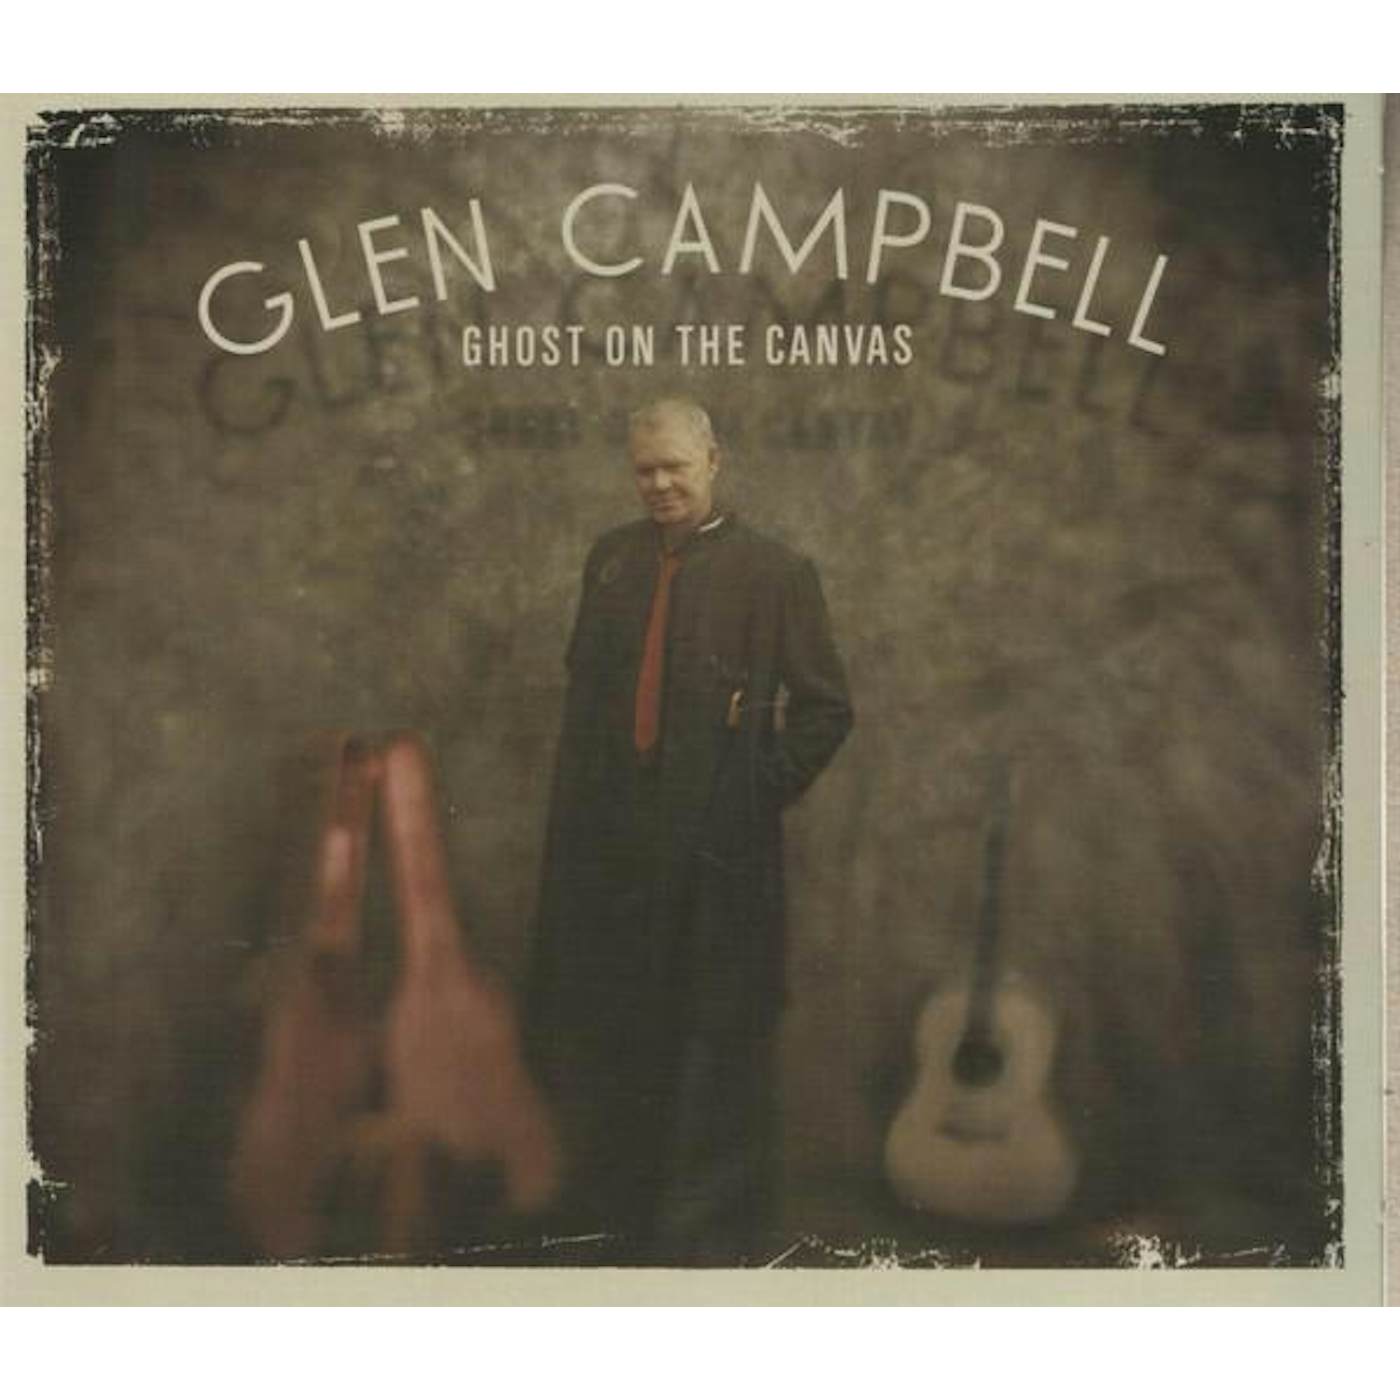 Glen Campbell GHOST ON THE CANVAS CD